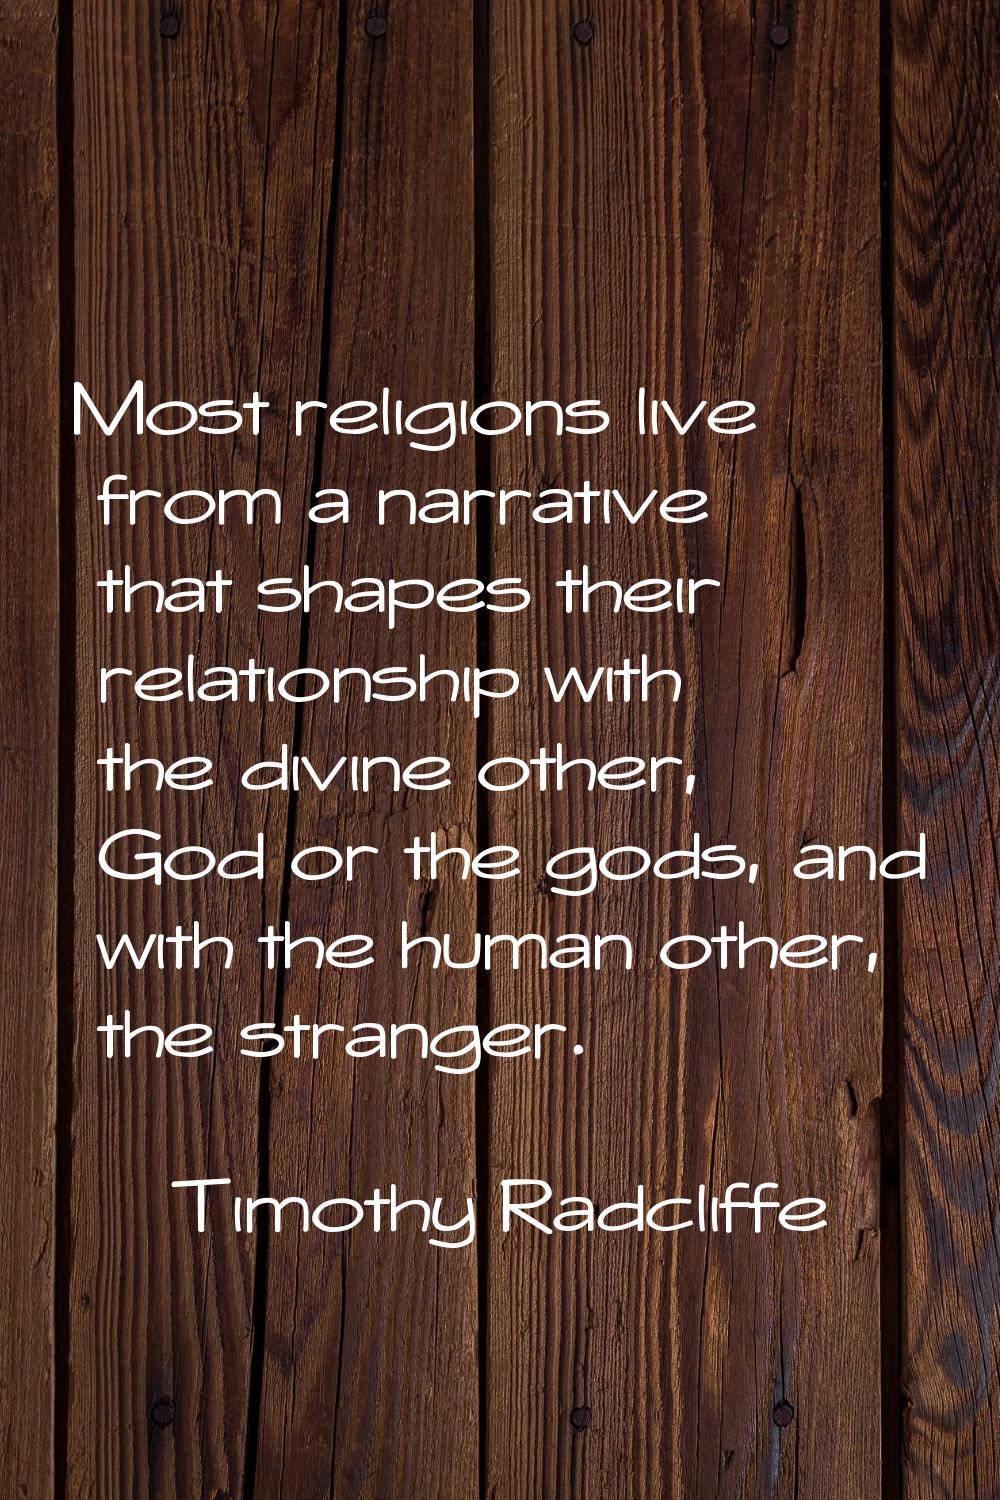 Most religions live from a narrative that shapes their relationship with the divine other, God or t